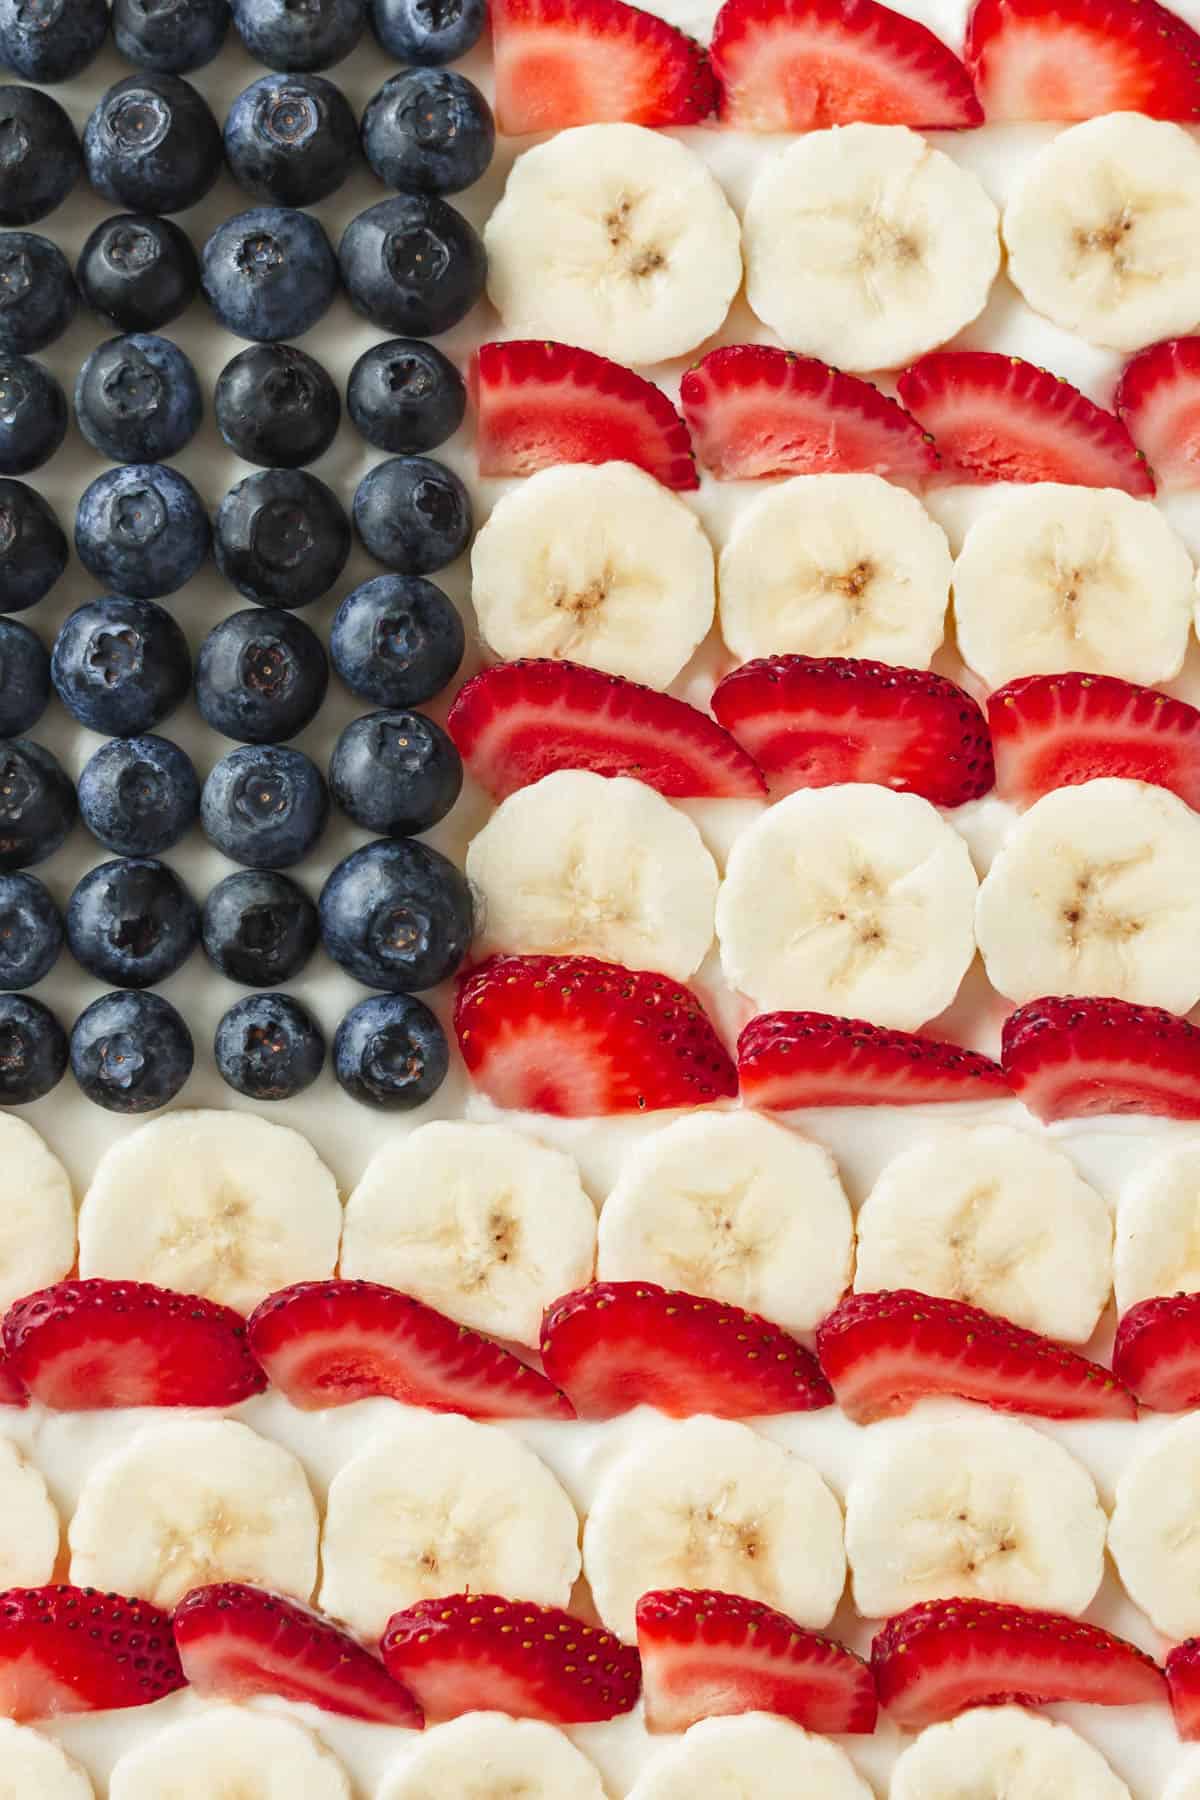 Blueberries, sliced bananas, and sliced strawberries arranged like the american flag on a sugar cookie "pizza."